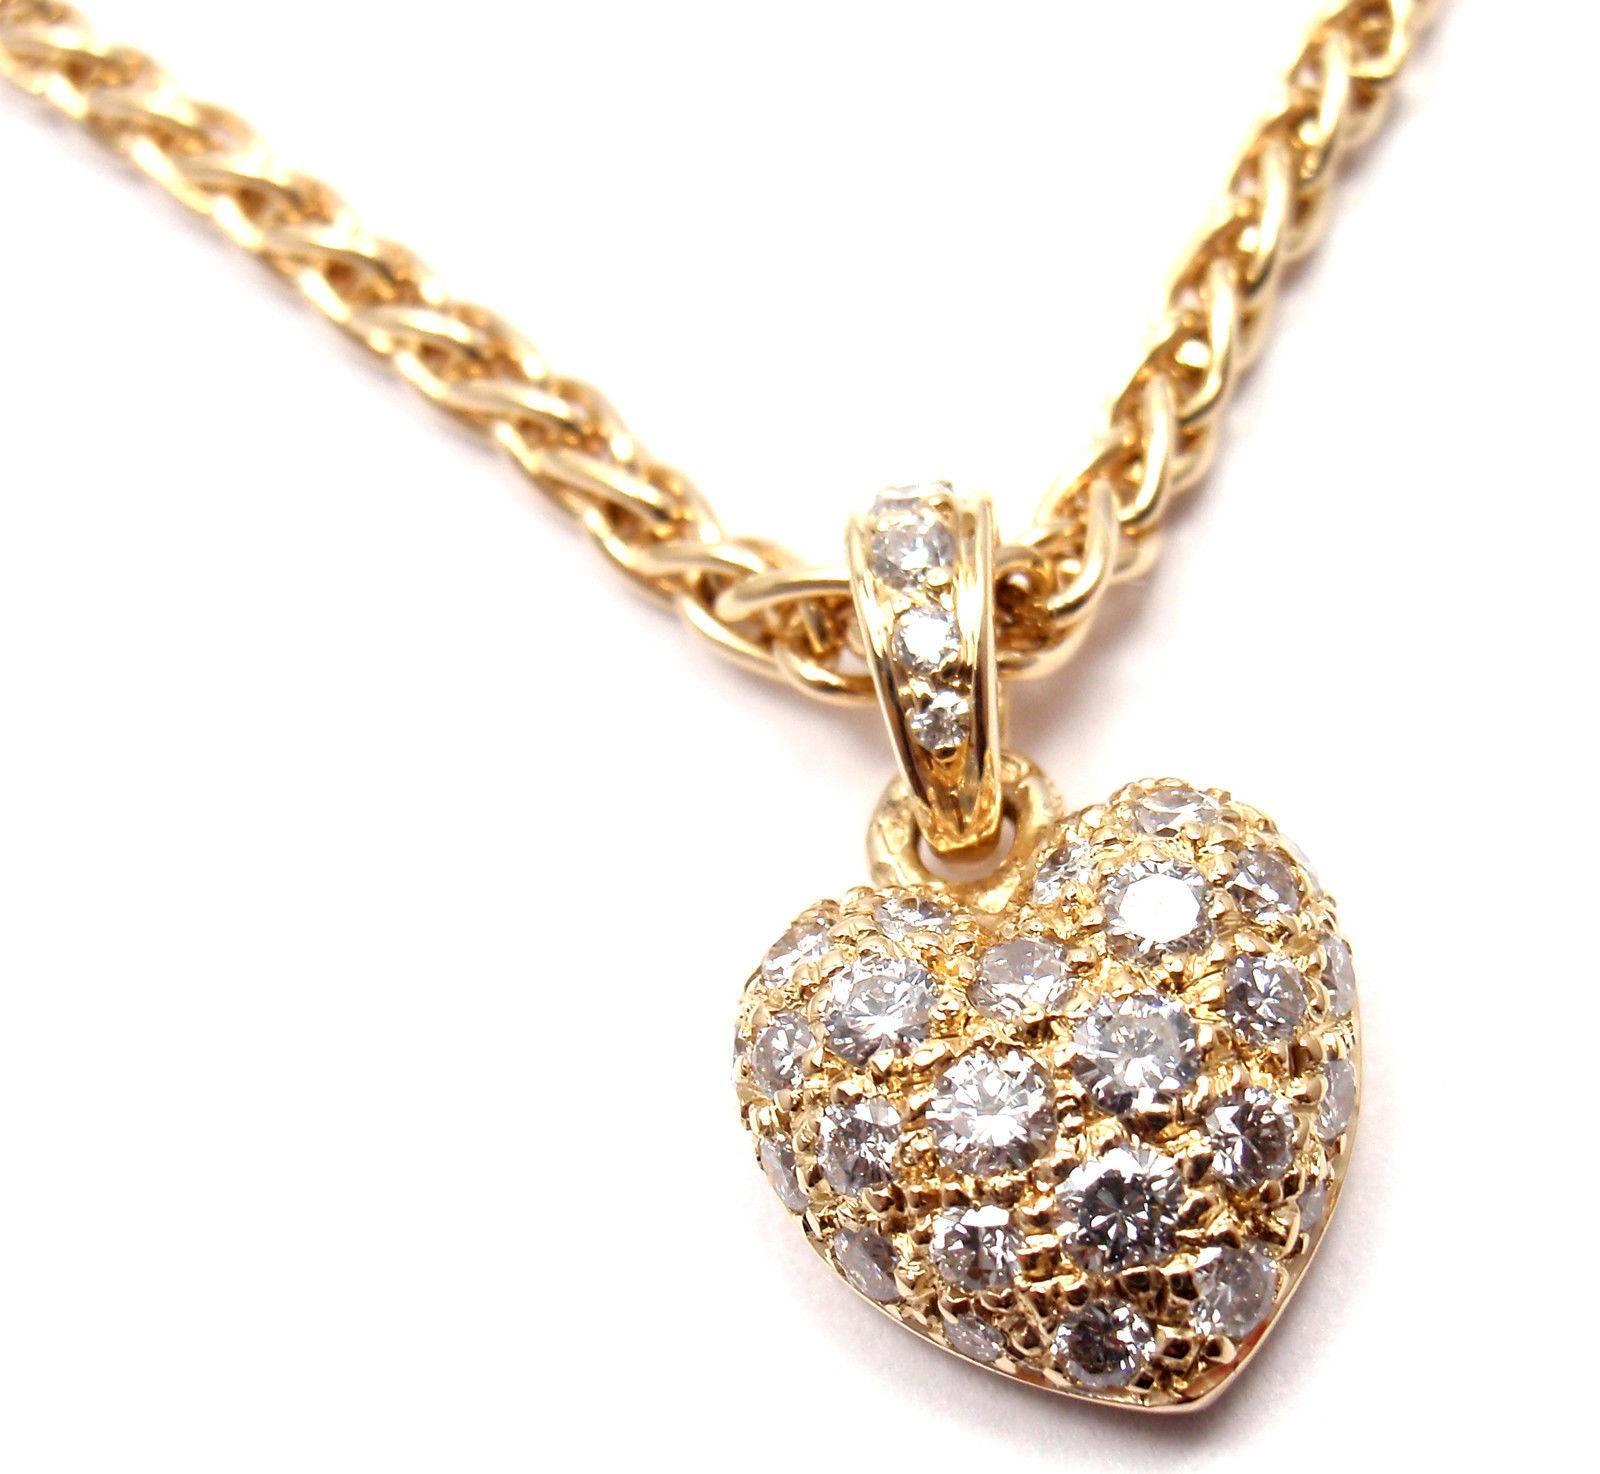 18k Yellow Gold Diamond Heart Pendant Necklace by Cartier.
With 34 round brilliant cut diamonds total weight approx 1ct. 
Diamonds VS1 clarity, E color

Details:
Chain Length: 16.5